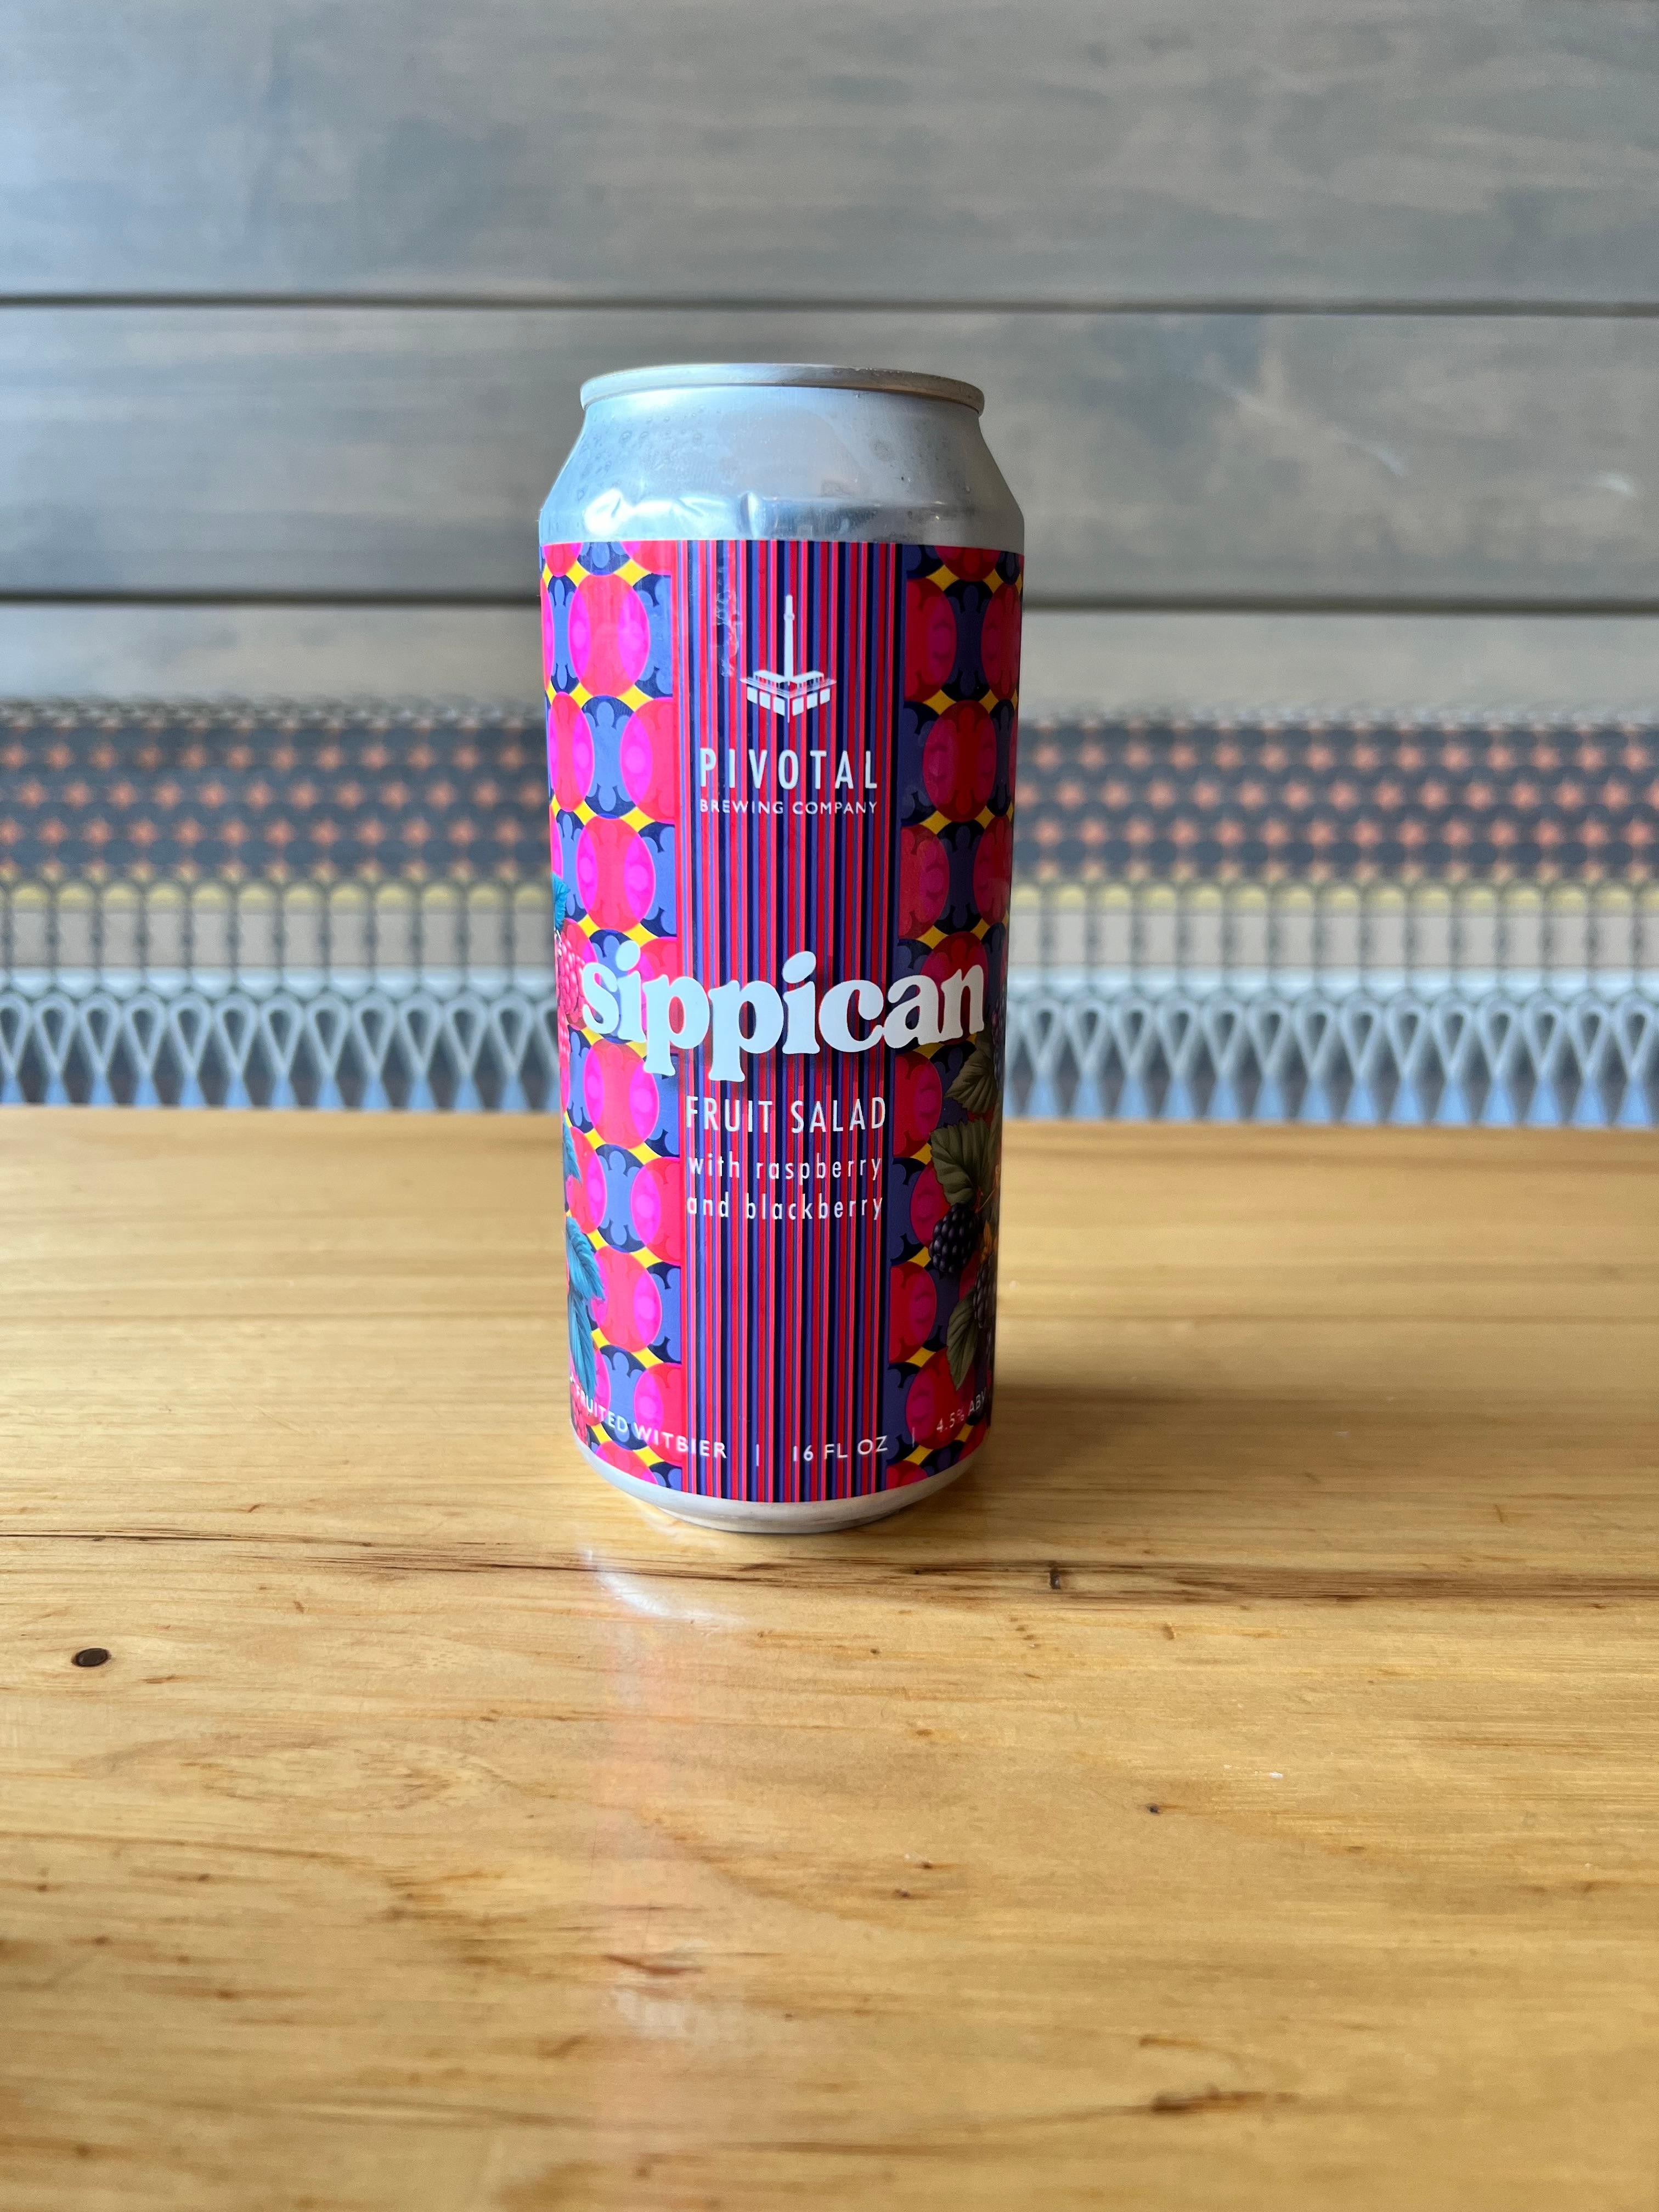 Pivotal Brewing Sippican Fruit Salad